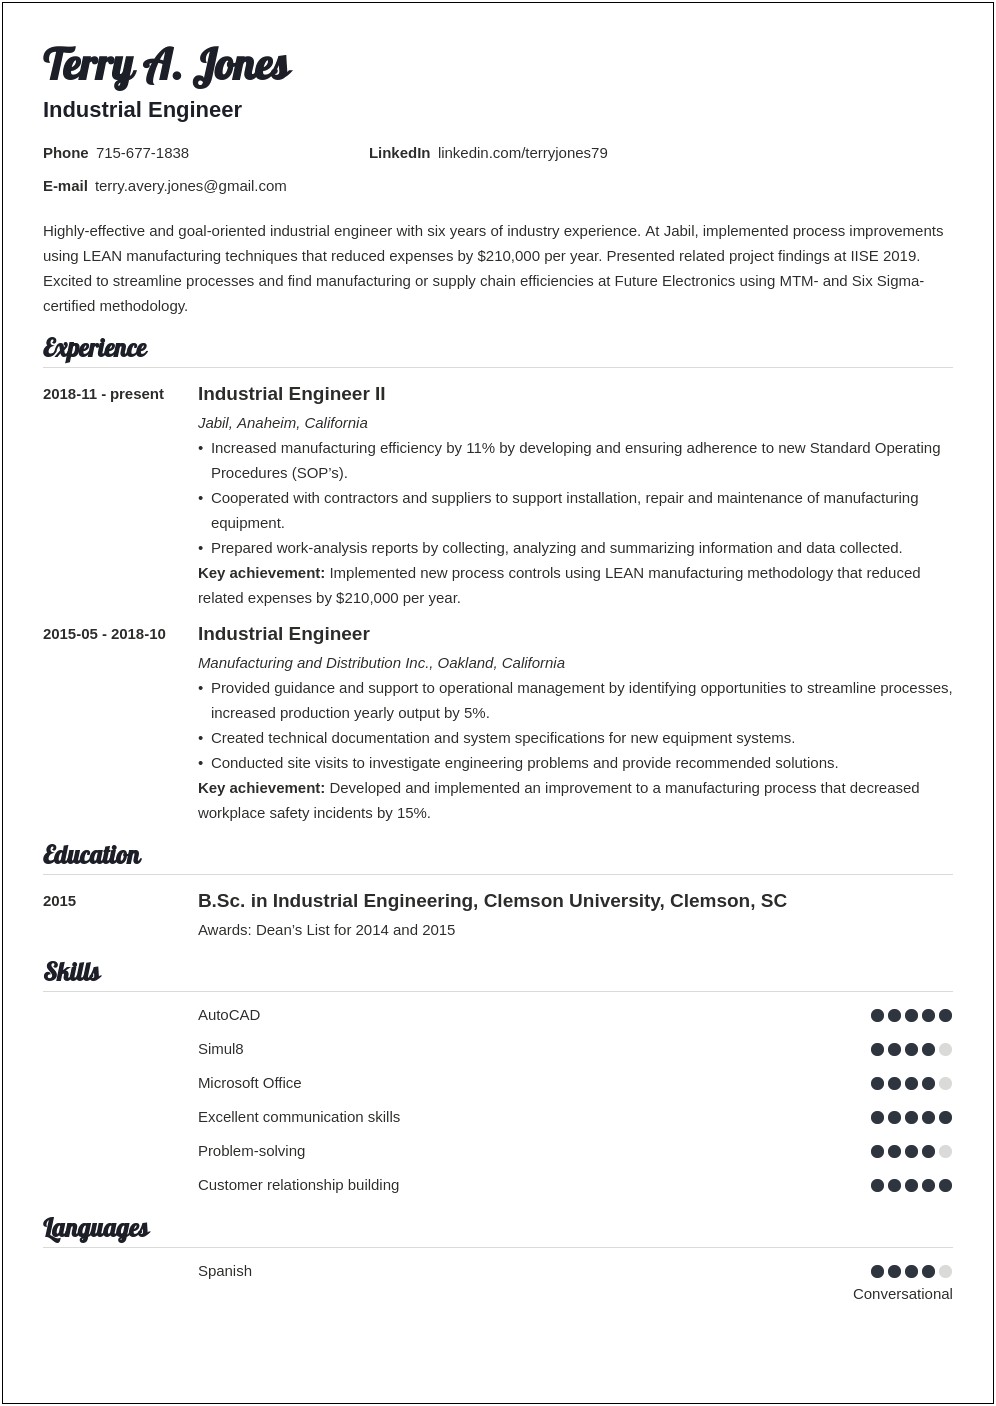 Examples Of Relevant Coursework In Resume Engineering